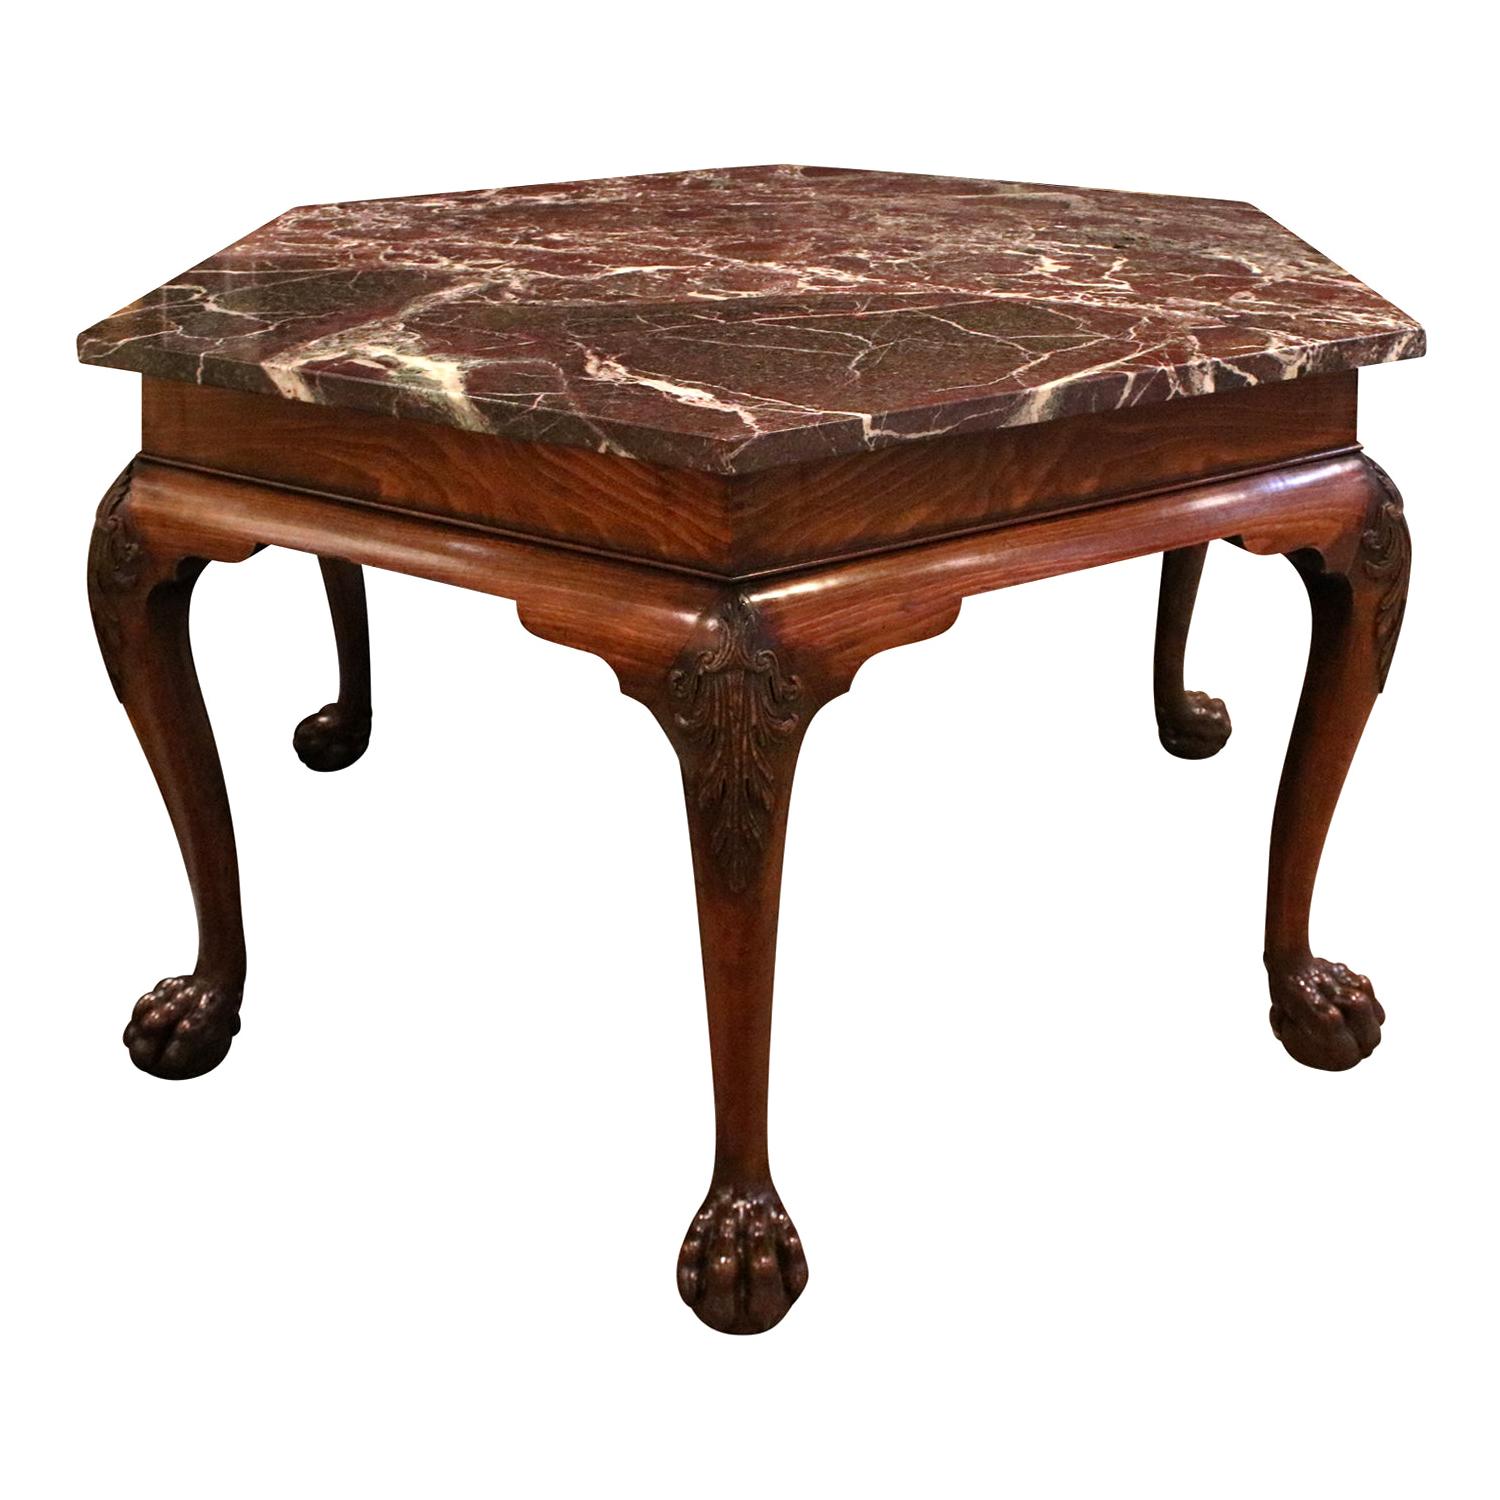 Artisan Crafted Chippendale Table with Marble Top, 18th Century